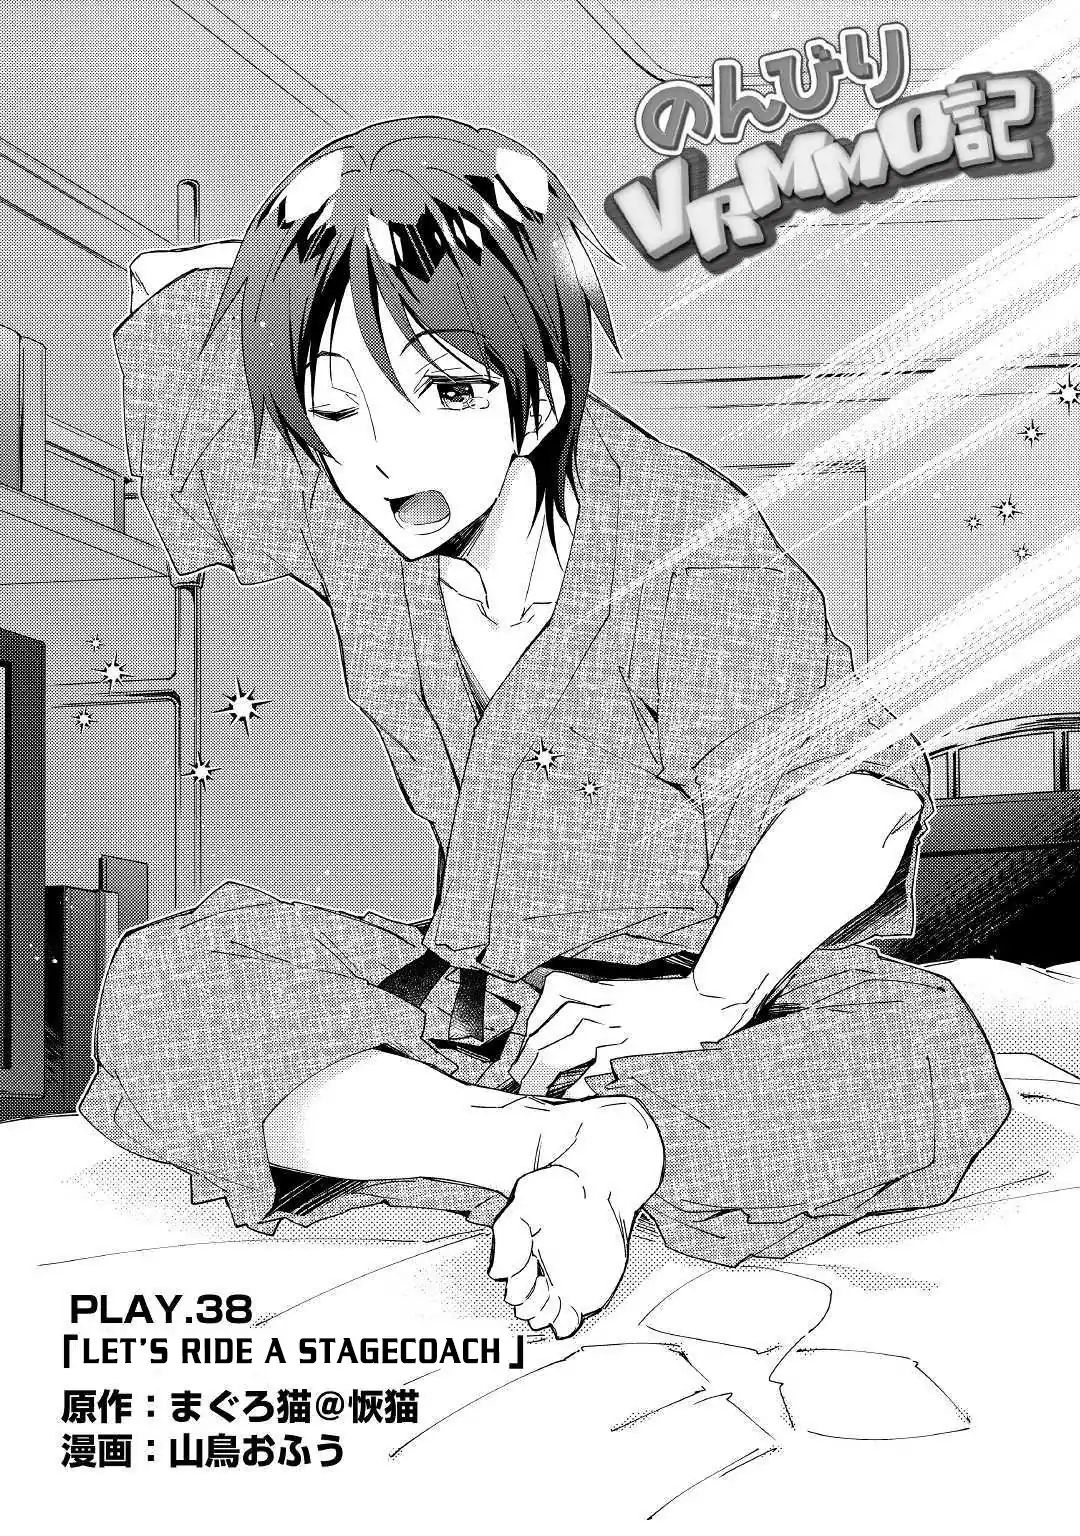 Nonbiri Vrmmoki Chapter 38: Let's Ride A Stagecoach - Picture 2